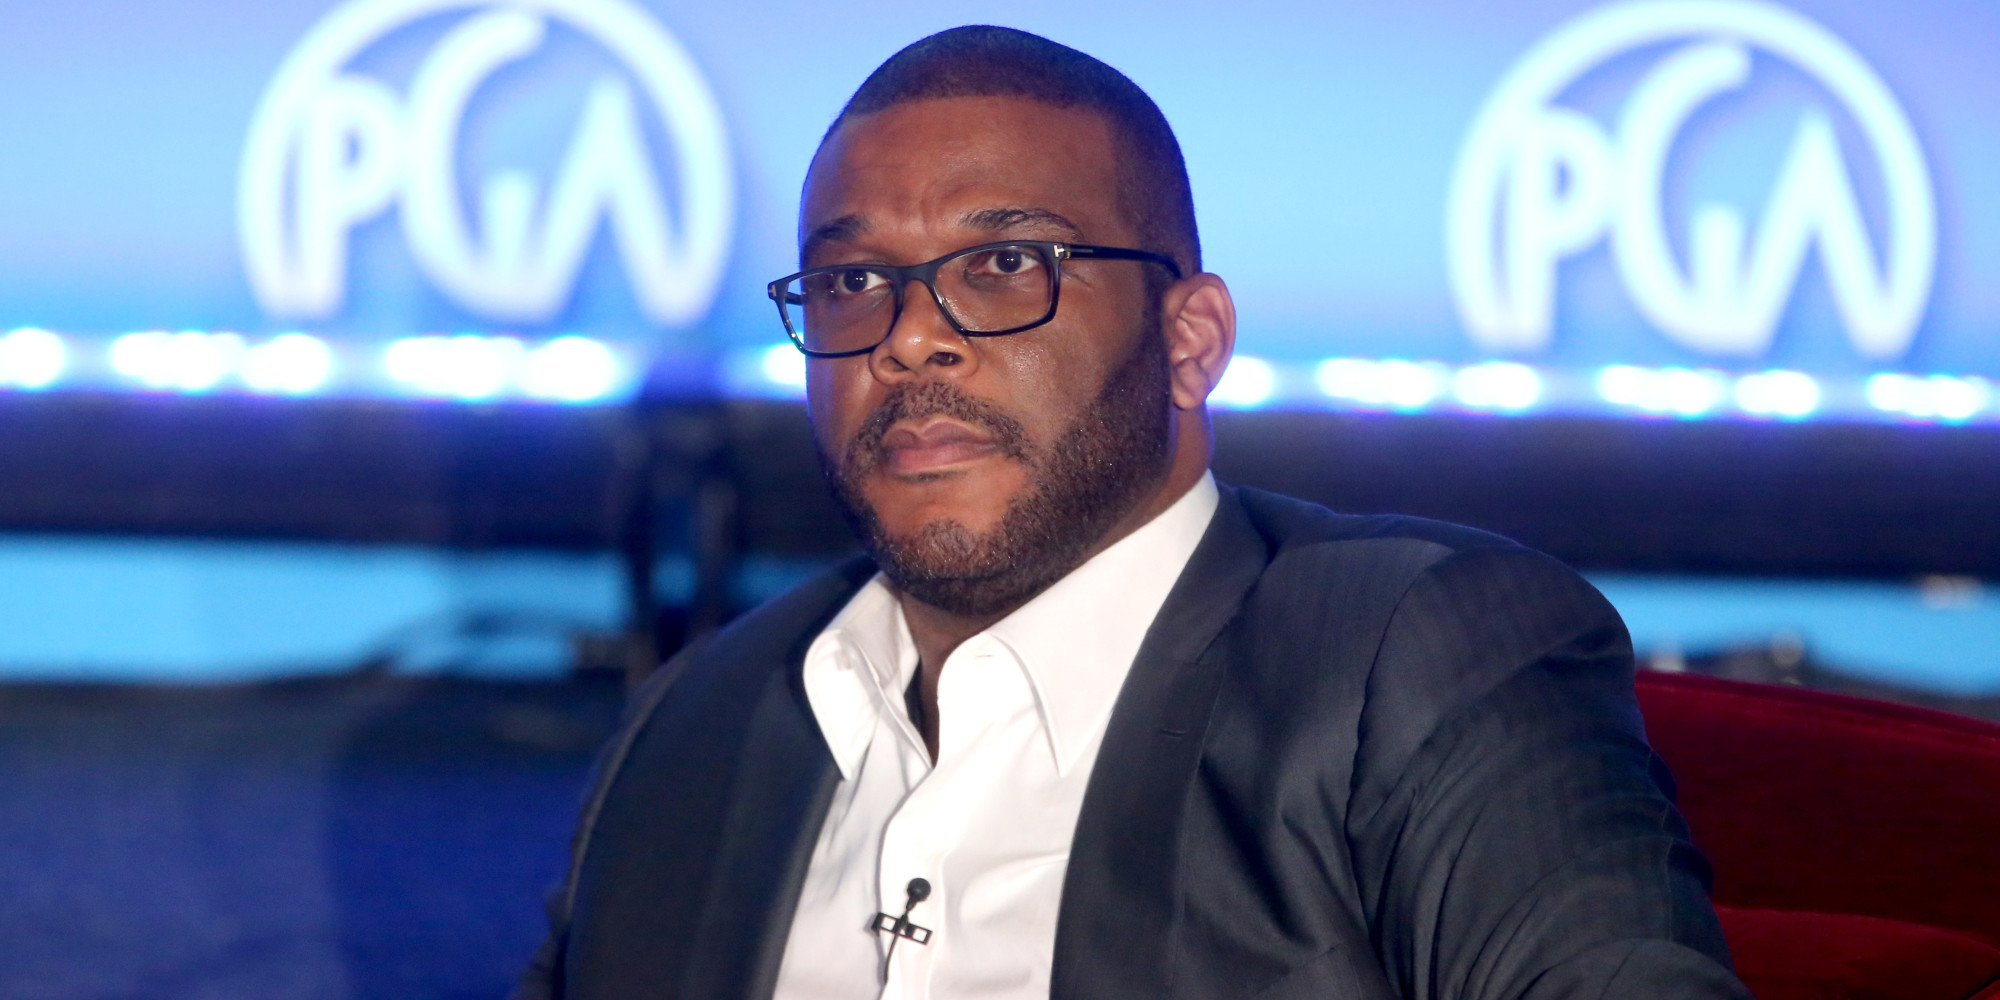 Did Tyler Perry go to acting school?